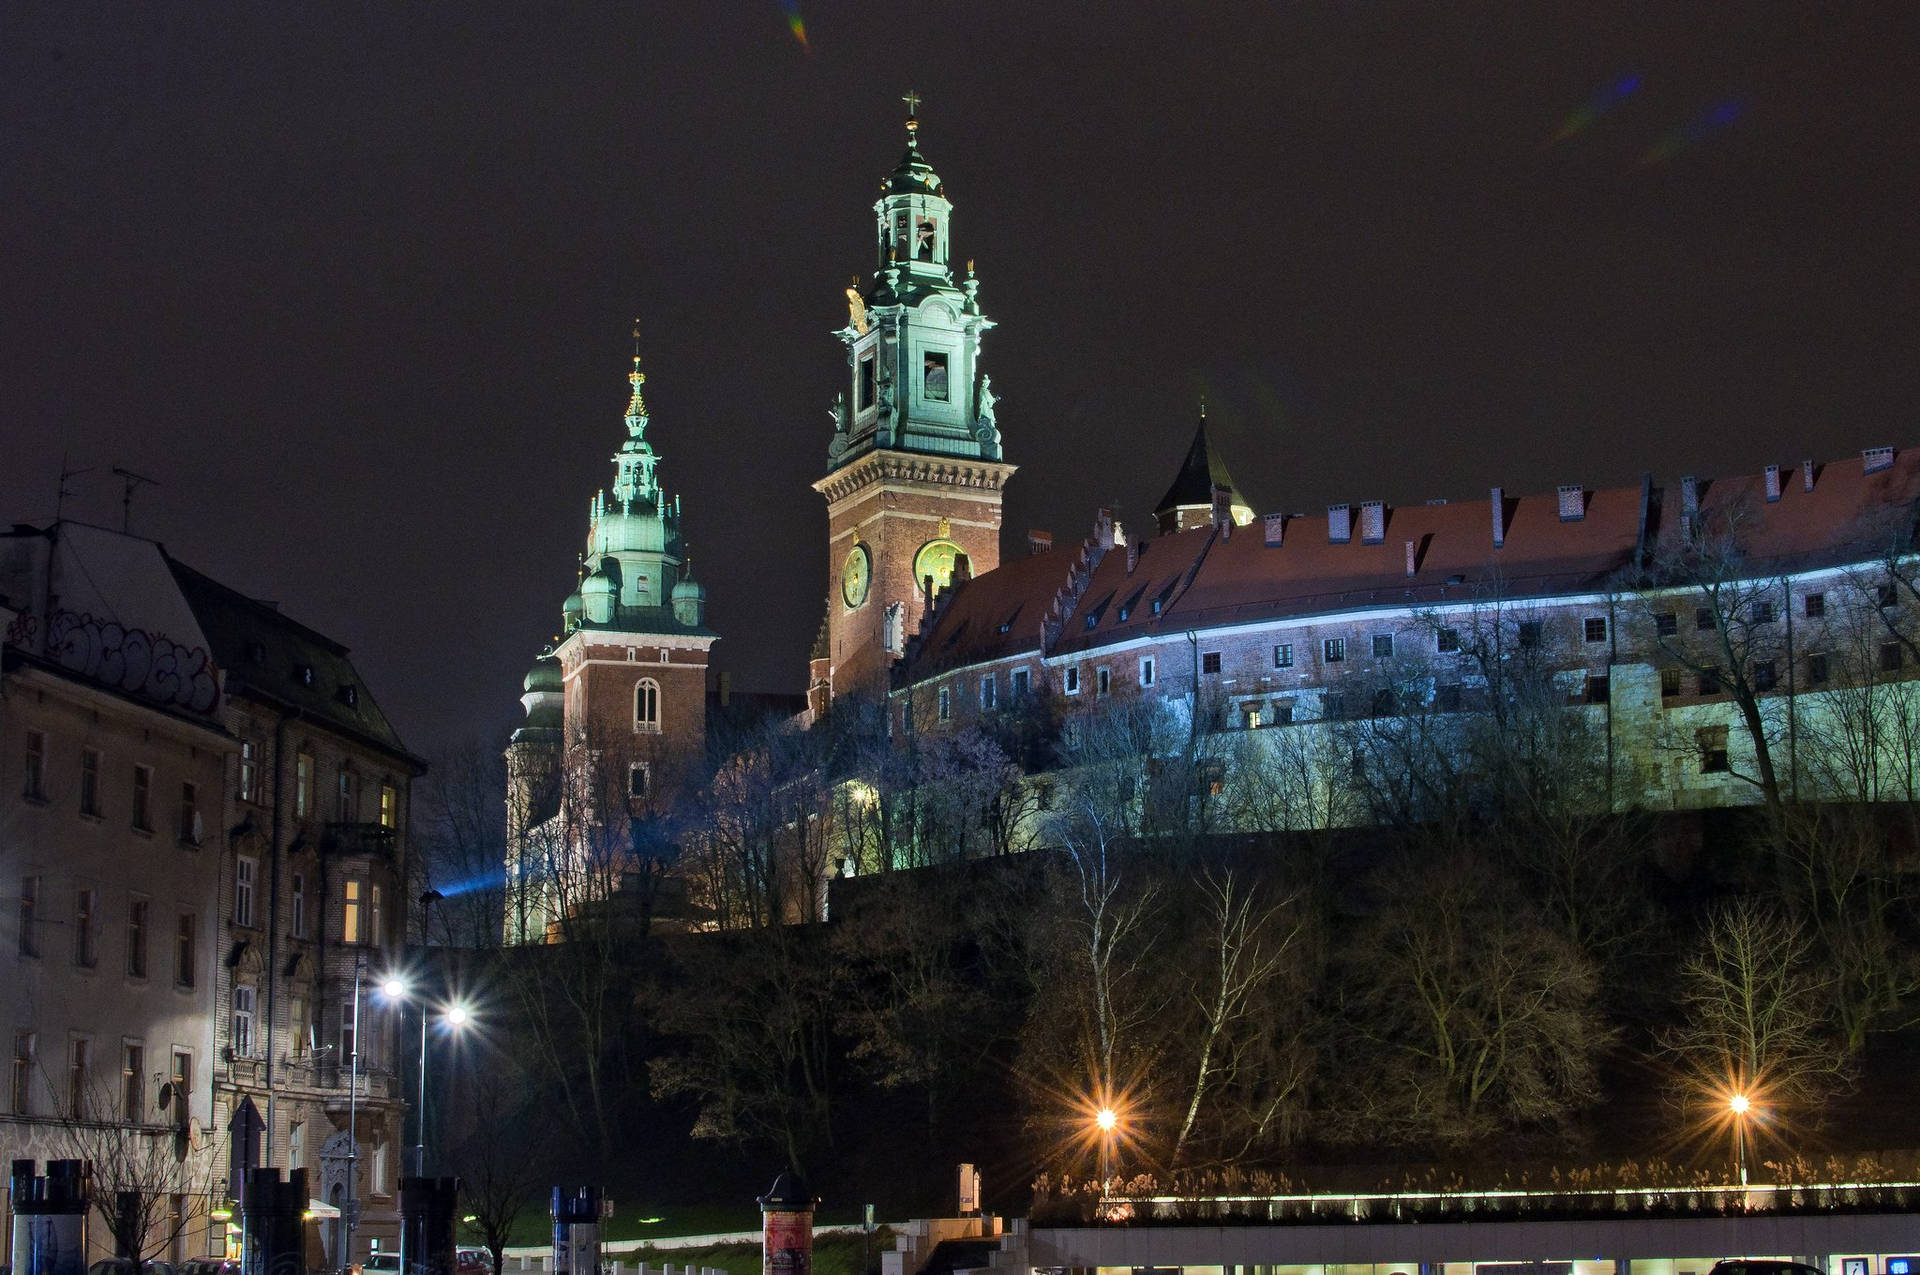 Krakow Poland's Wawel Royal Castle's Towers At Night, Wallpaper